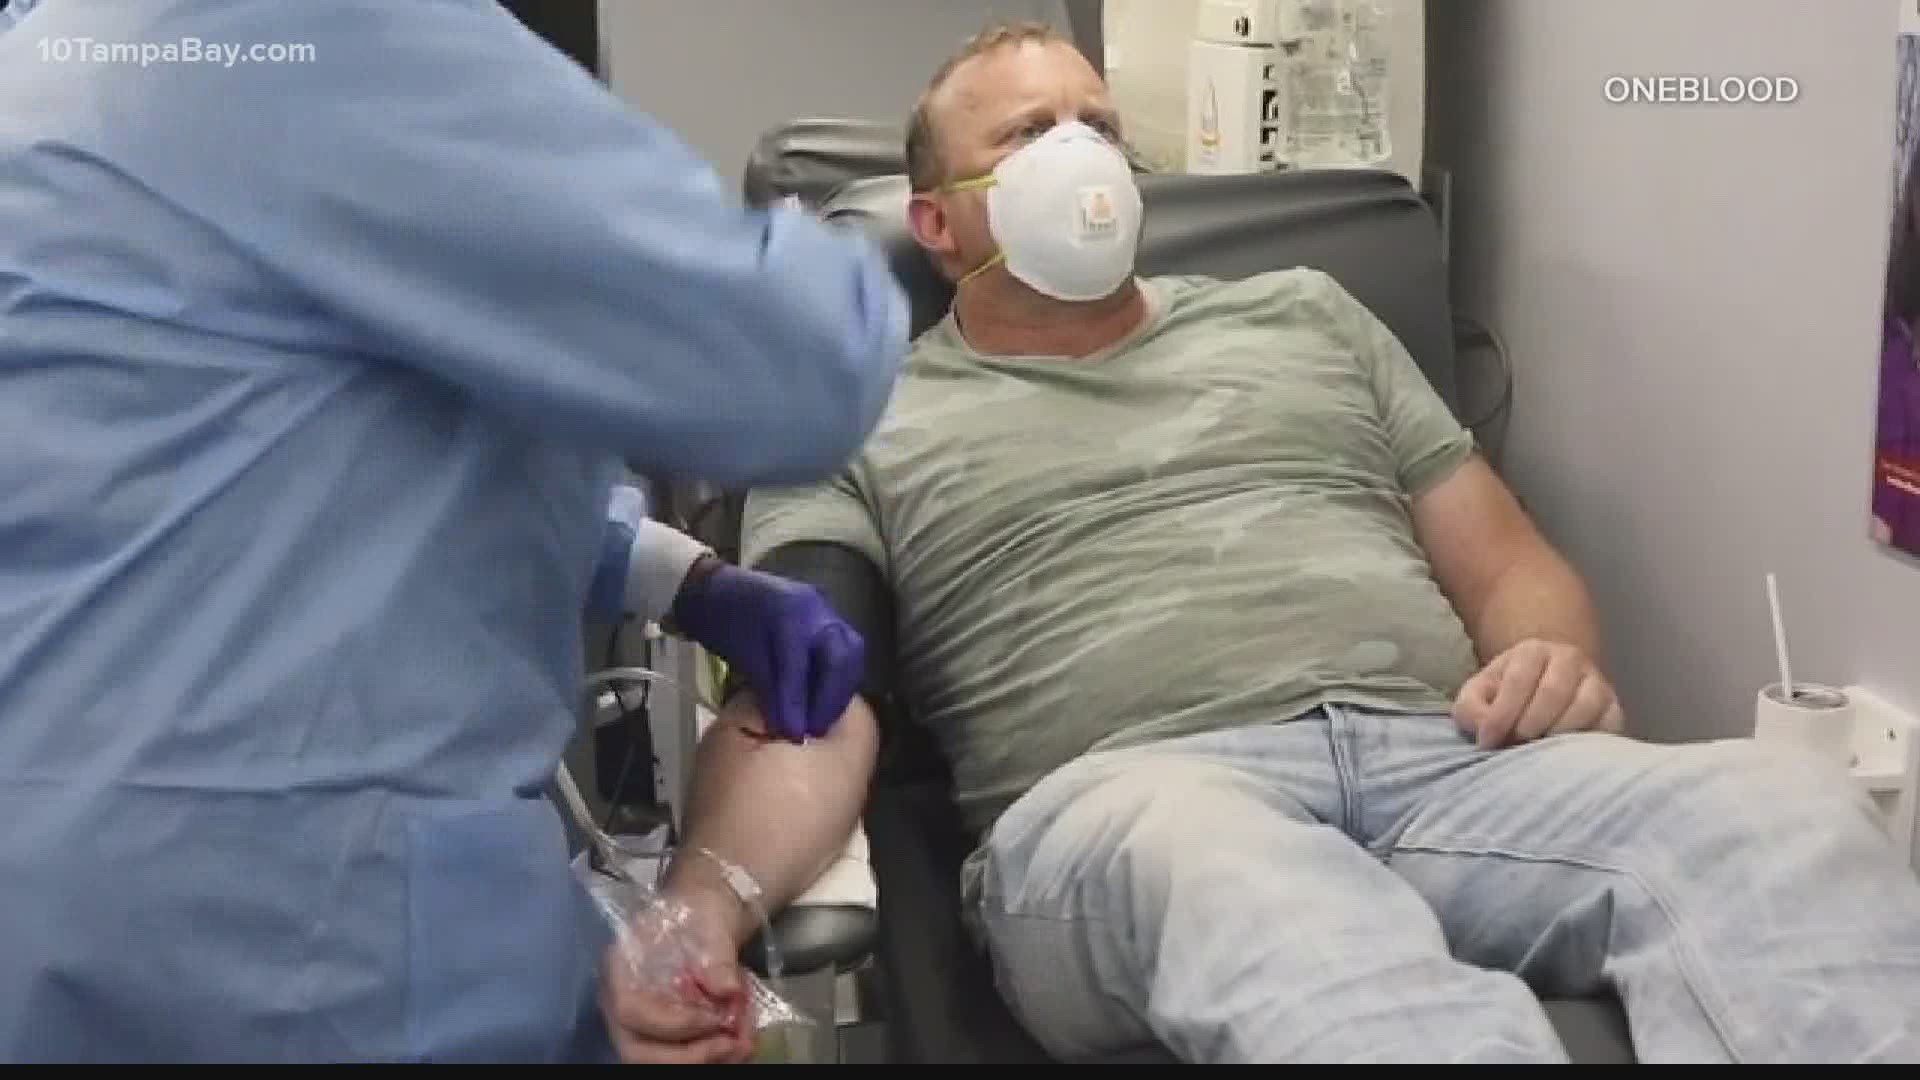 People who recover from the coronavirus can donate the potentially life-saving plasma, which some hospitals say they are using on more patients than before.